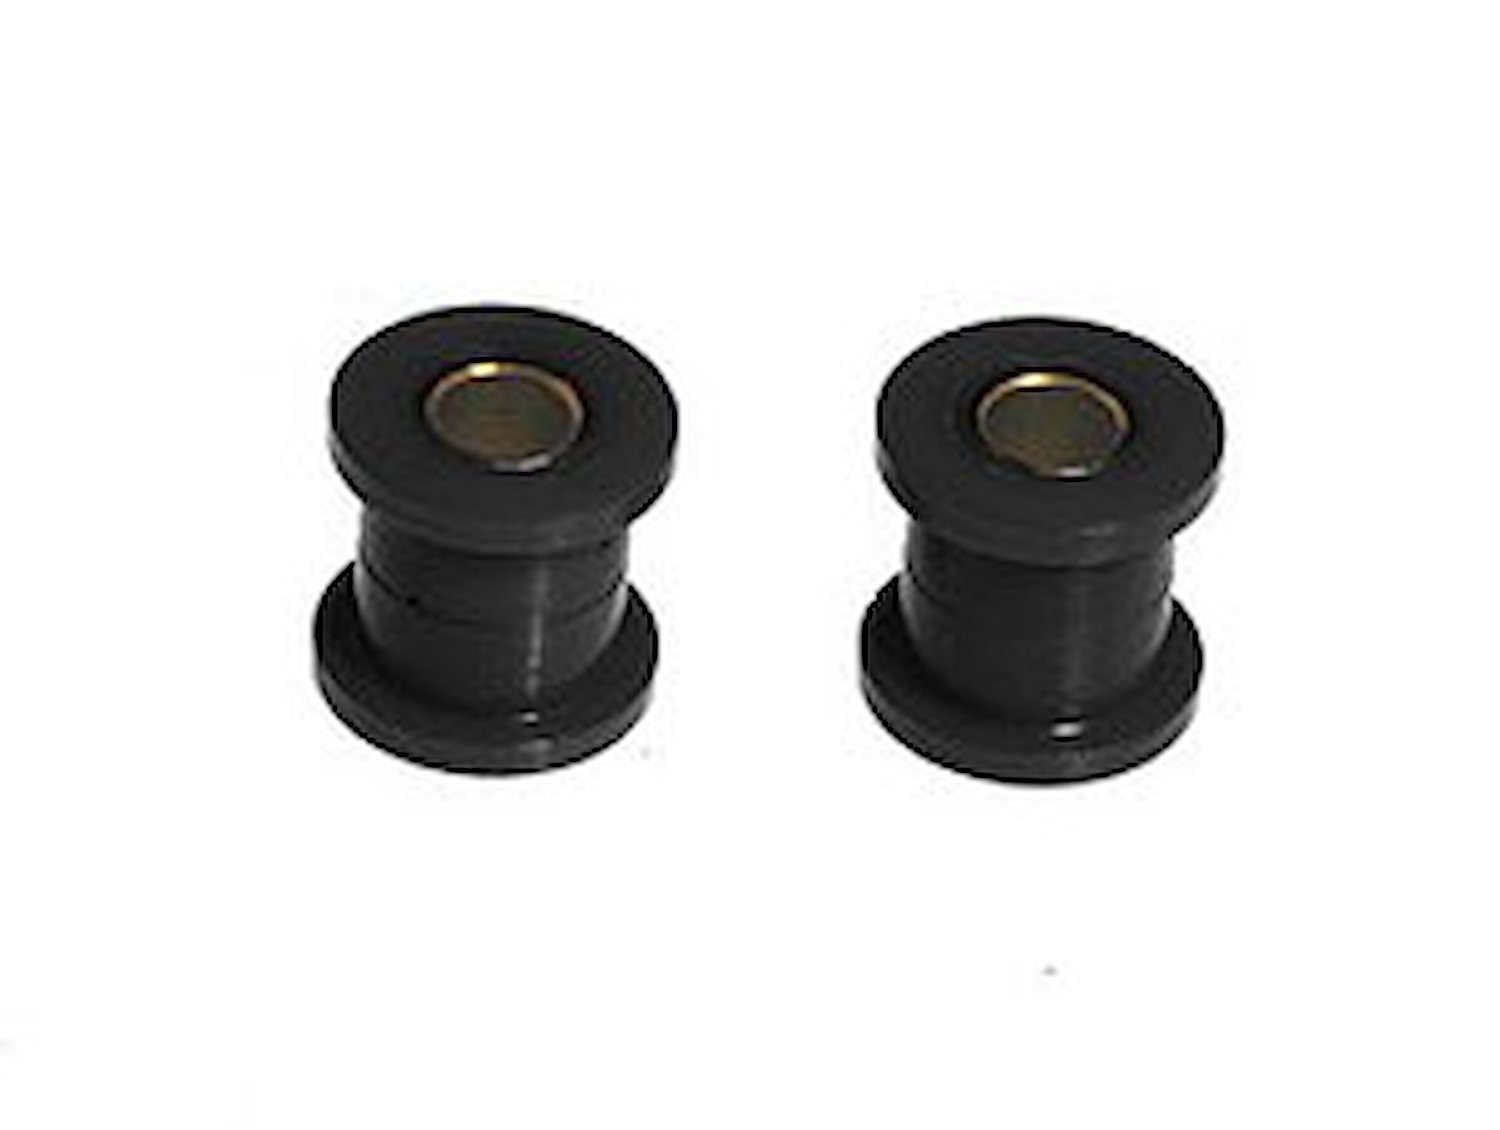 End Link Bushing Kit Black Front Incl. 4 Bushings And 2 Sleeves